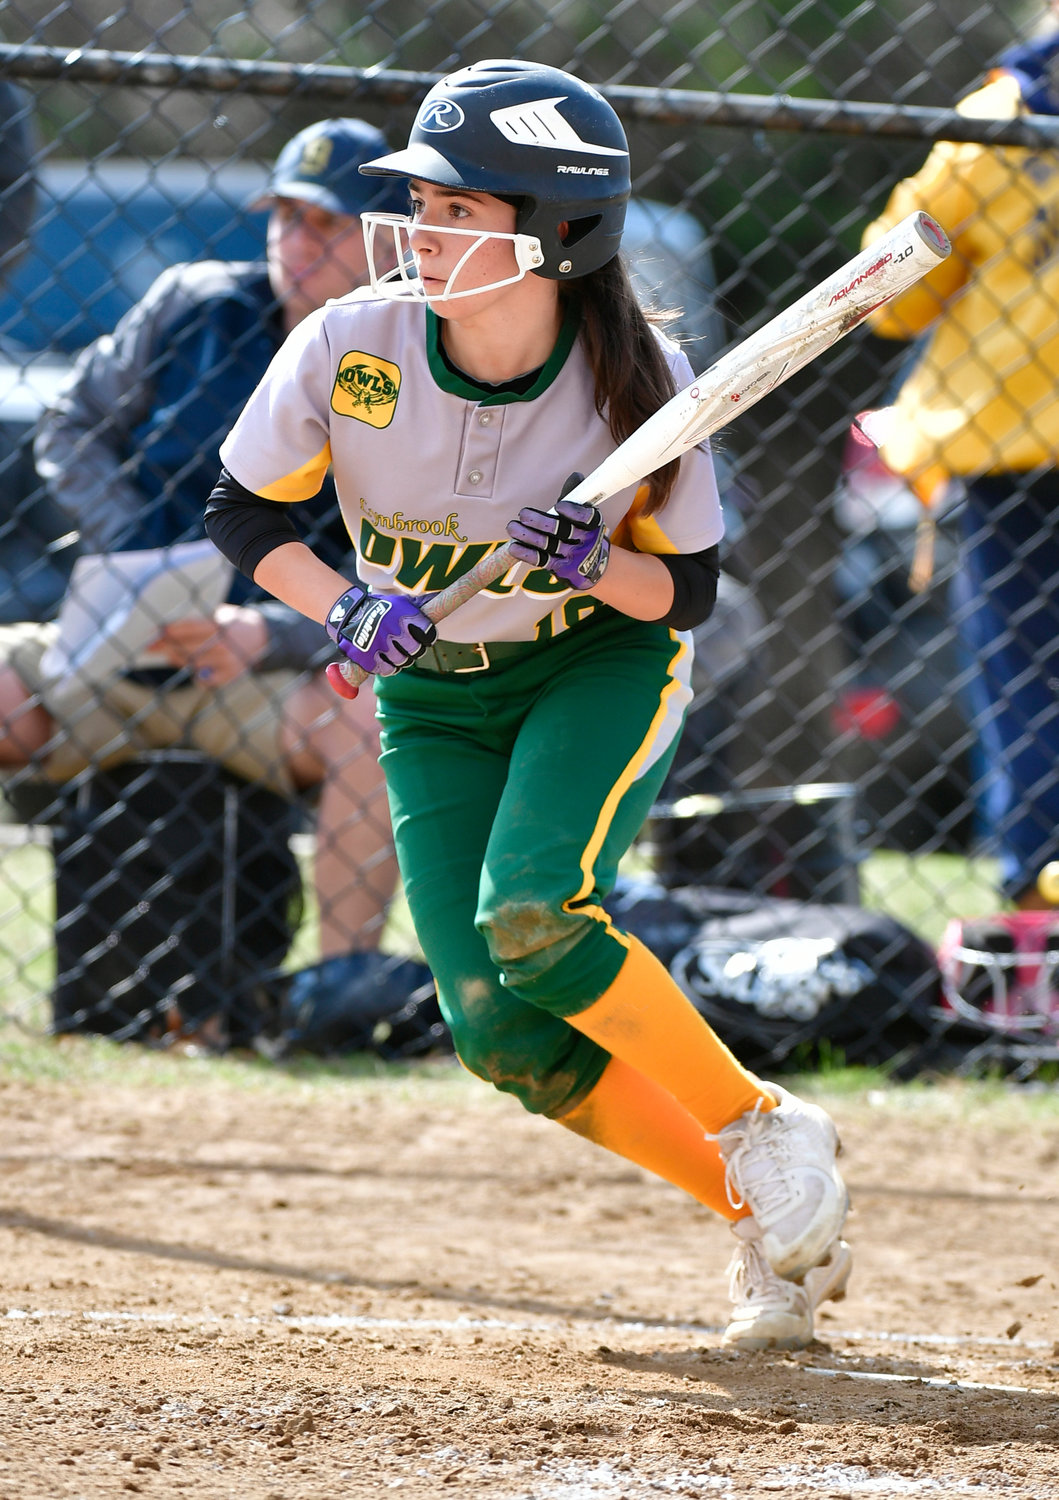 Sophomore shortstop Katie Sharkey anchors Lynbrook’s infield defense and is also batting .370 from the leadoff spot.